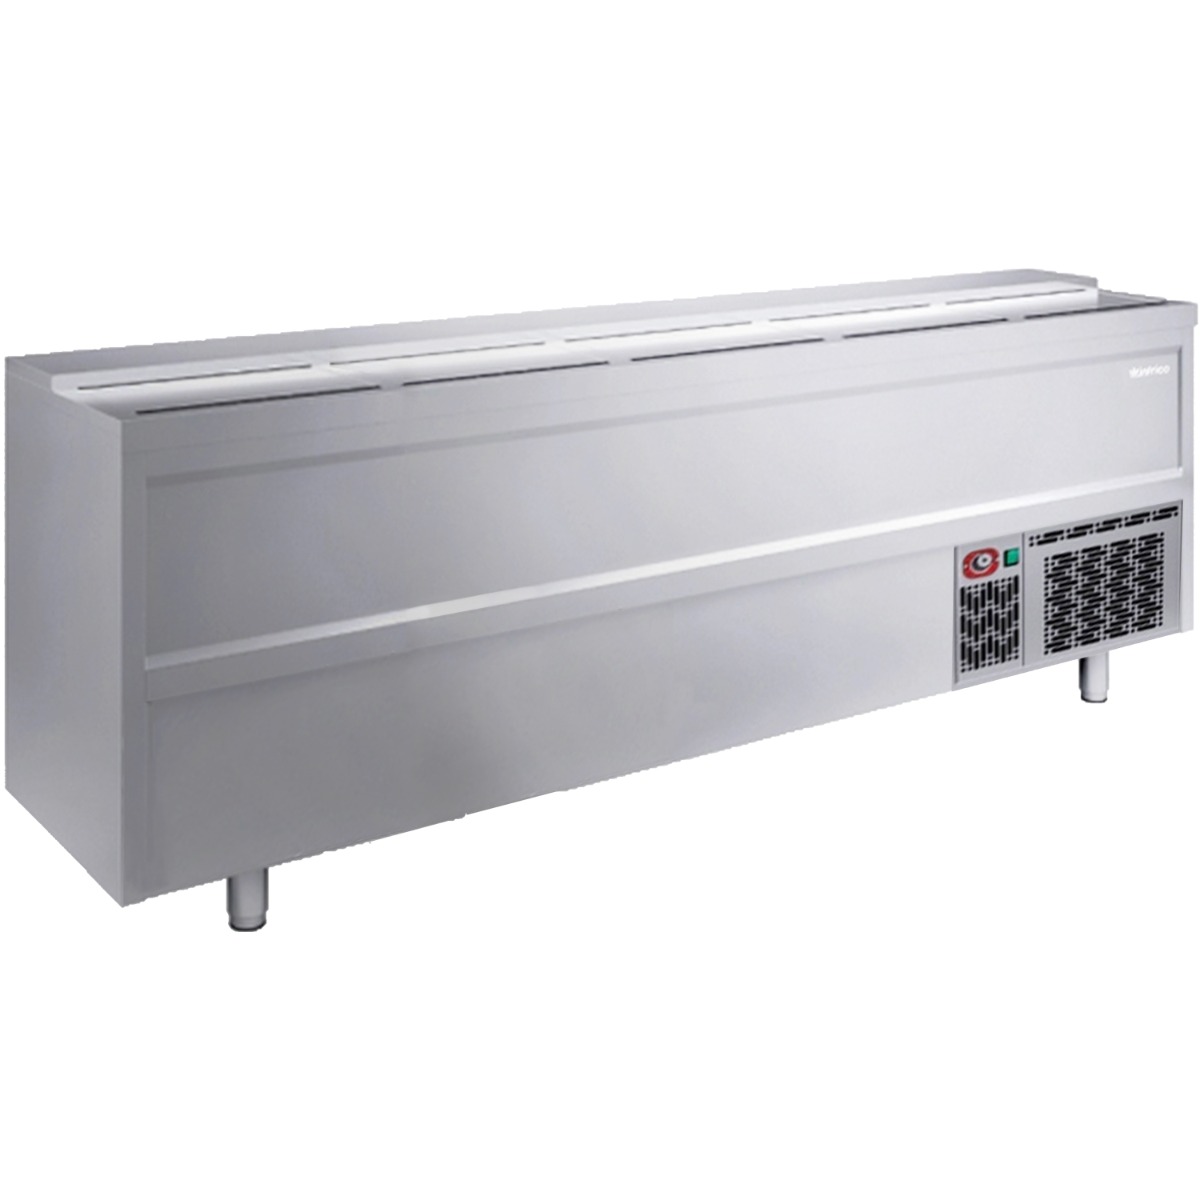 INFRICO Stainless Steel Beer Dump 800L - EB2500